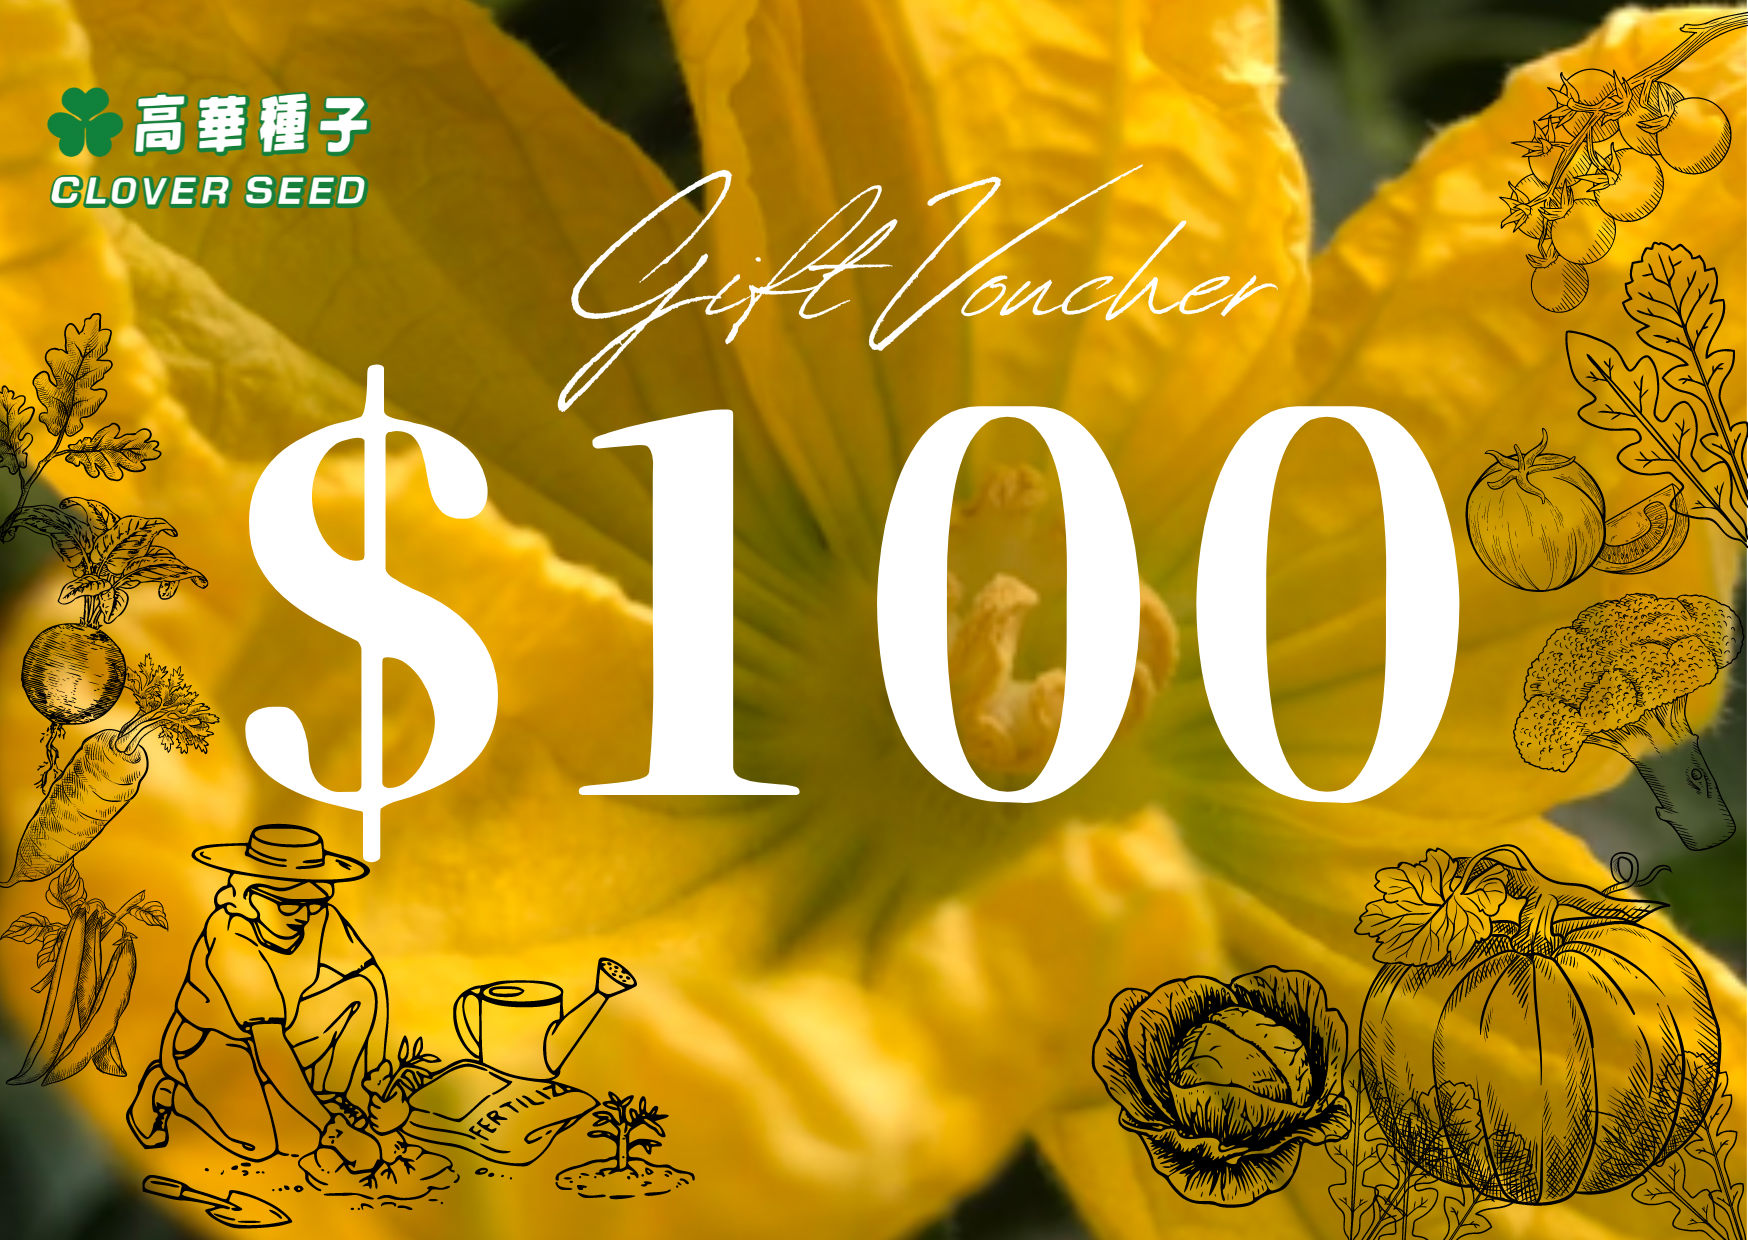  $100 Clover Seed Gift Card